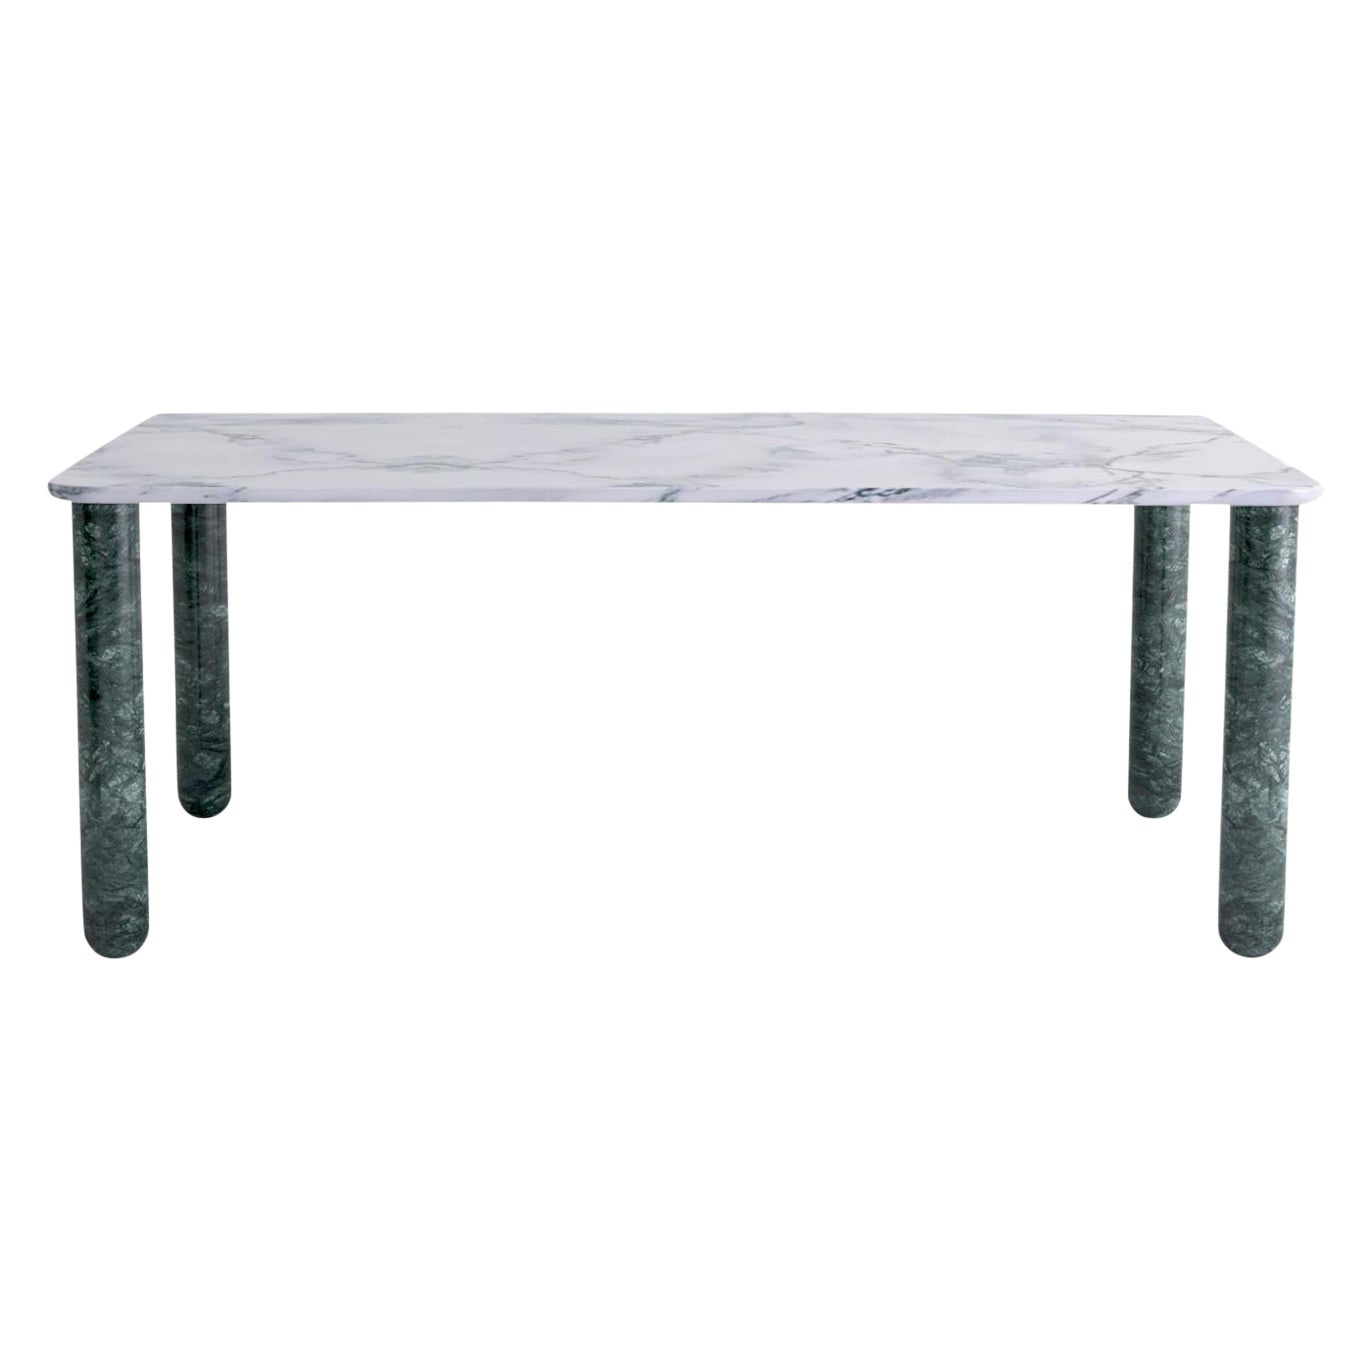 Xlarge White and Green Marble "Sunday" Dining Table, Jean-Baptiste Souletie